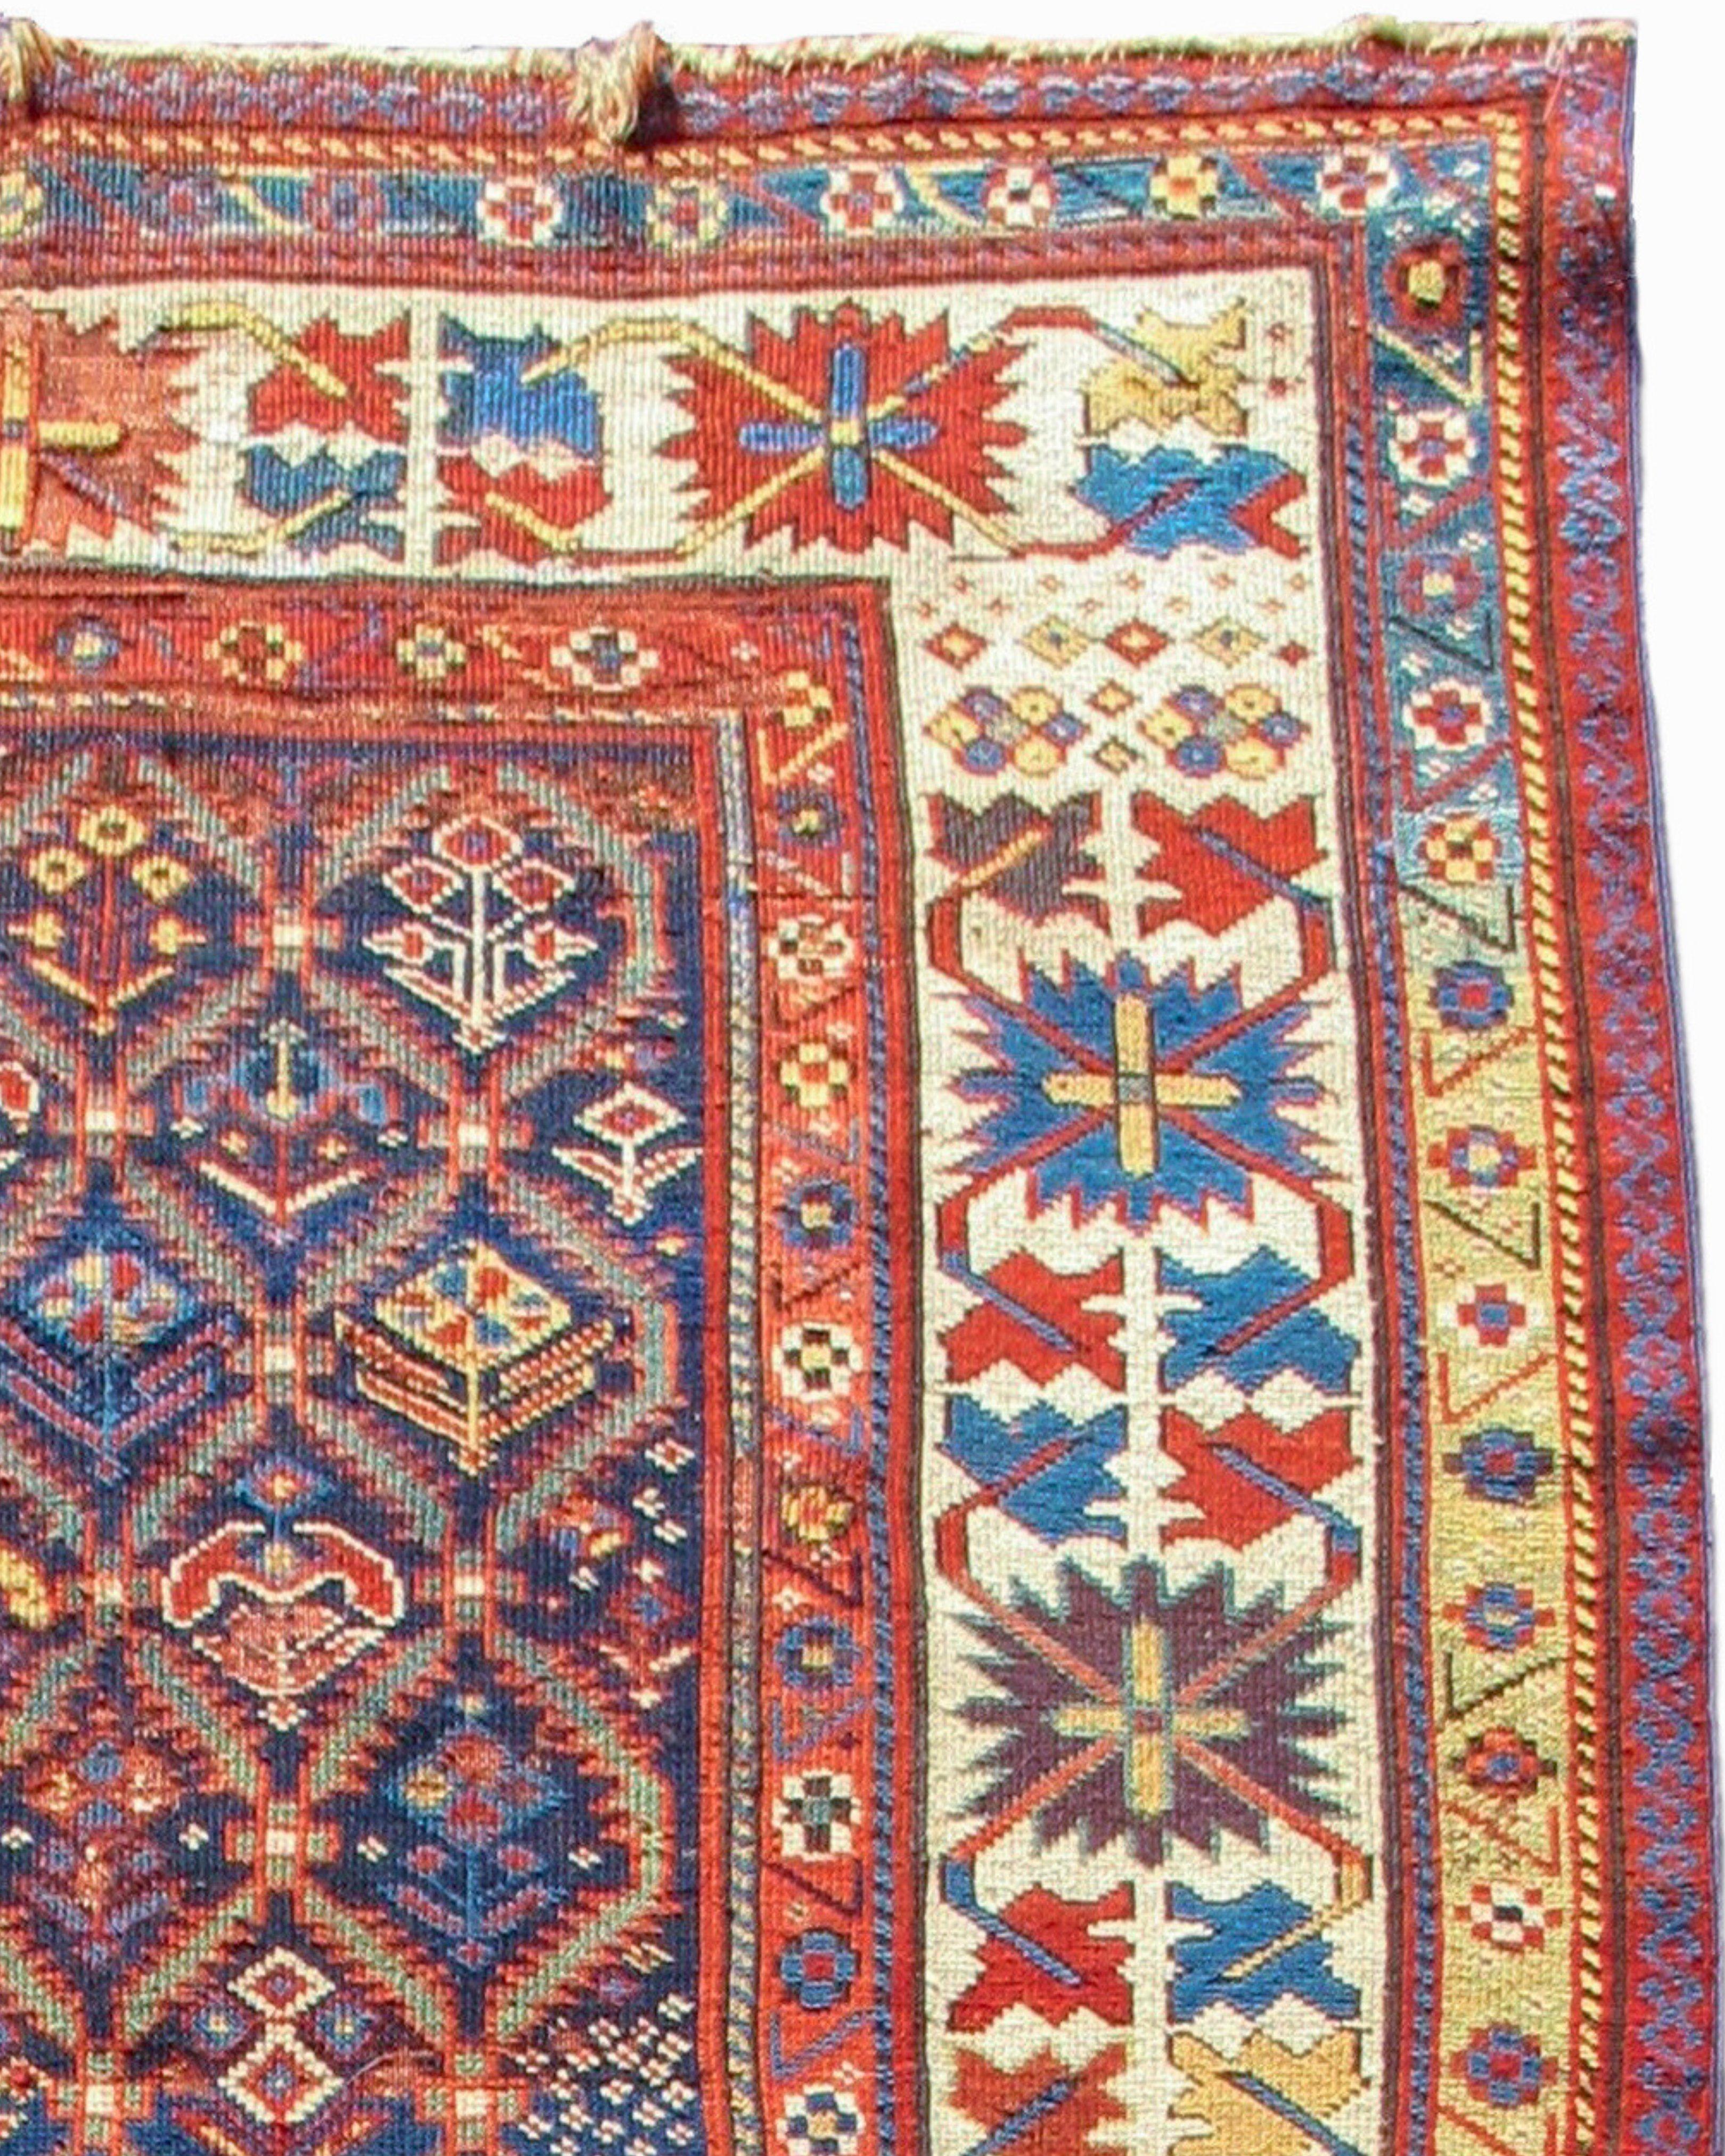 Hand-Woven Antique Caucasian Shahsevan Rug, Mid-19th Century For Sale